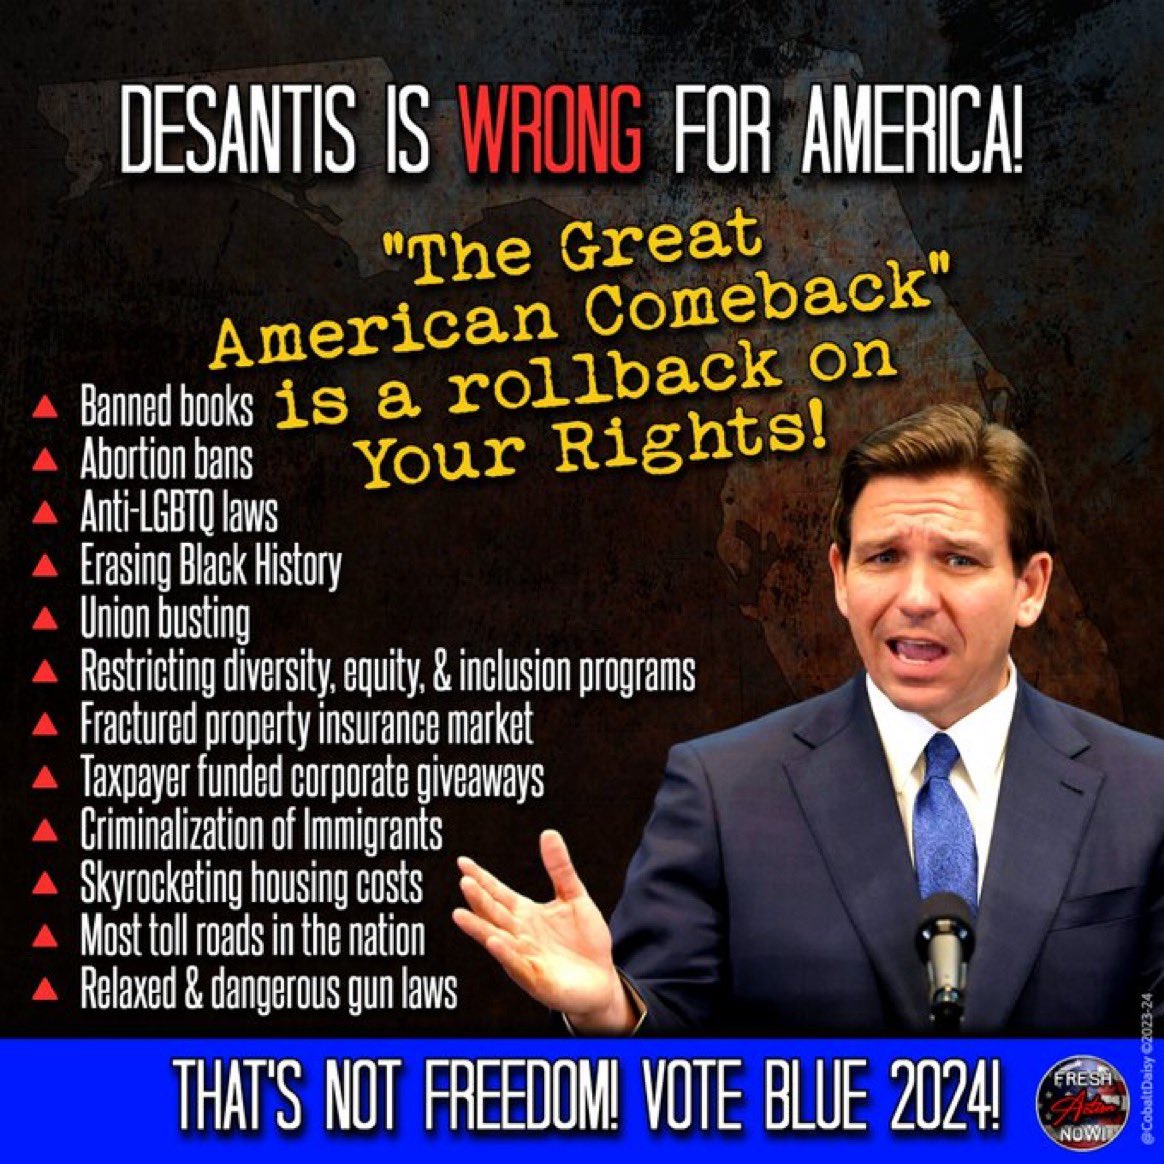 @RonDeSantis That's rich coming from a man who weaponized the state government to punish a corp for exercising their freedom of speech, took control over college to create an indoctrination curriculum,  and stomped on local governments right to self-rule.
#DeSantisIsADangerToTheUSA